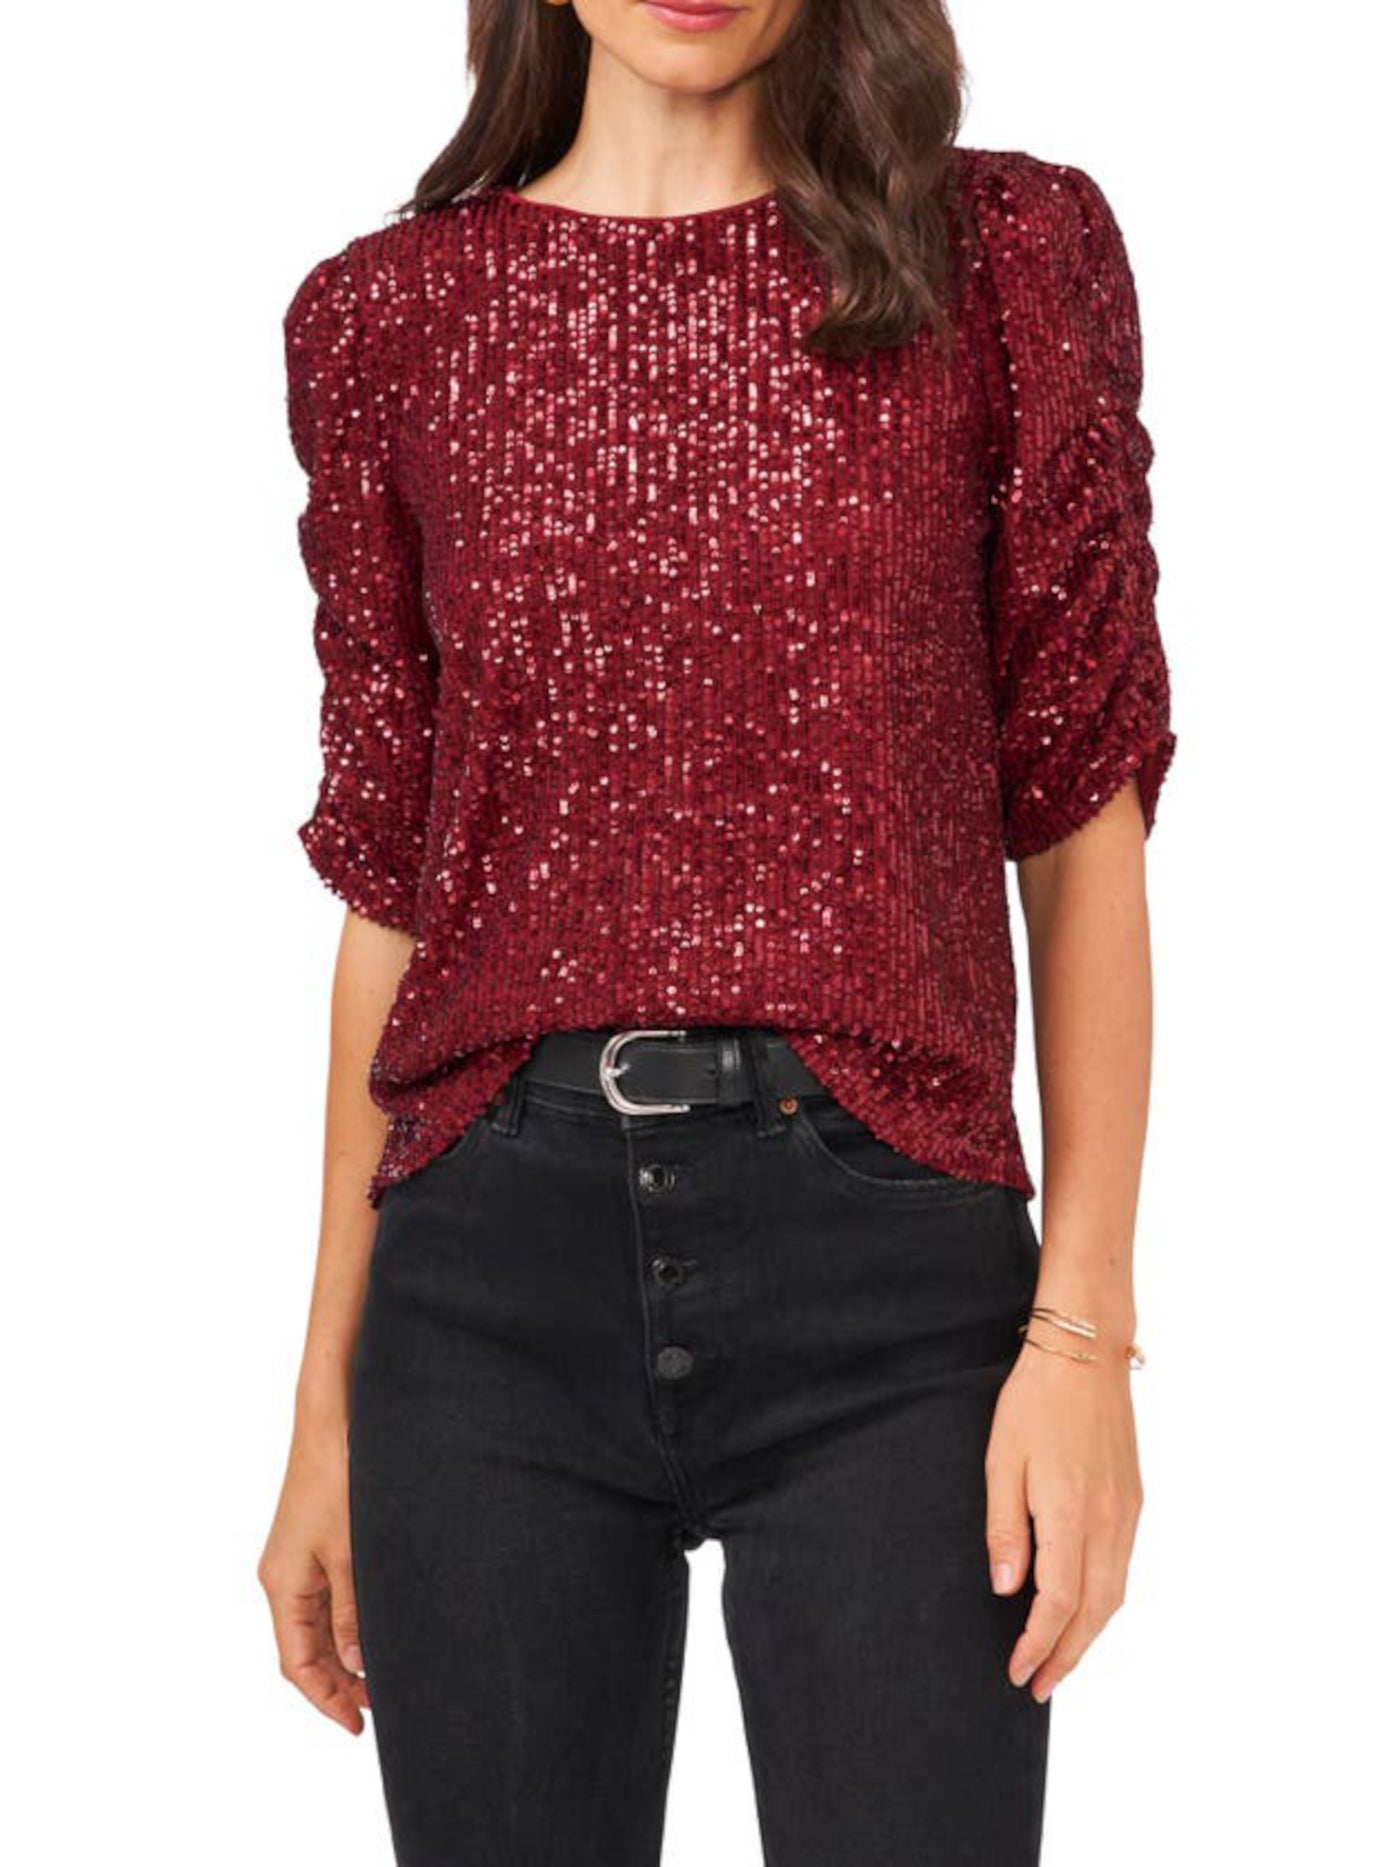 VINCE CAMUTO Womens Maroon Sequined Ruched Elbow Sleeve Keyhole Back Round Neck Party Blouse M